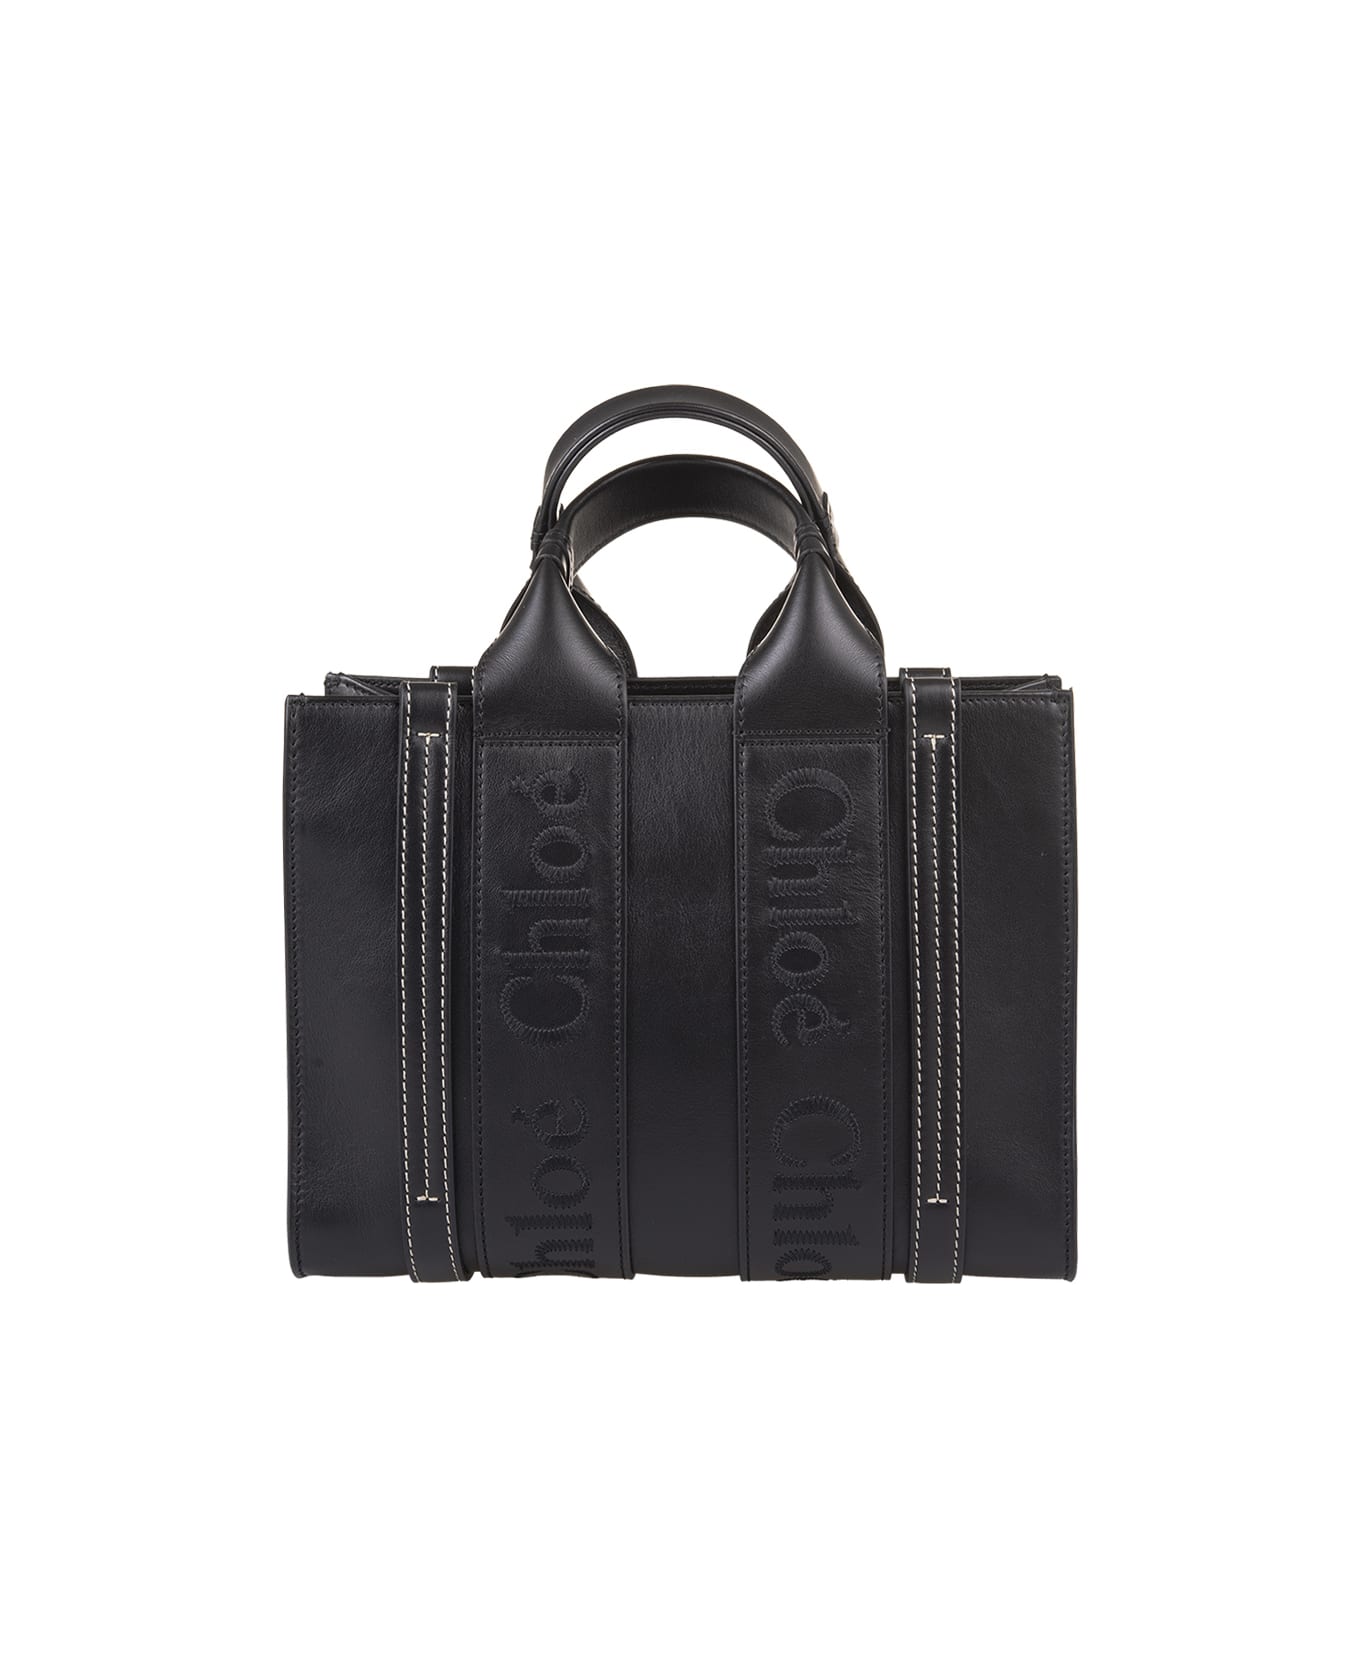 Chloé Woody Small Shopping Bag In Black Leather - Black